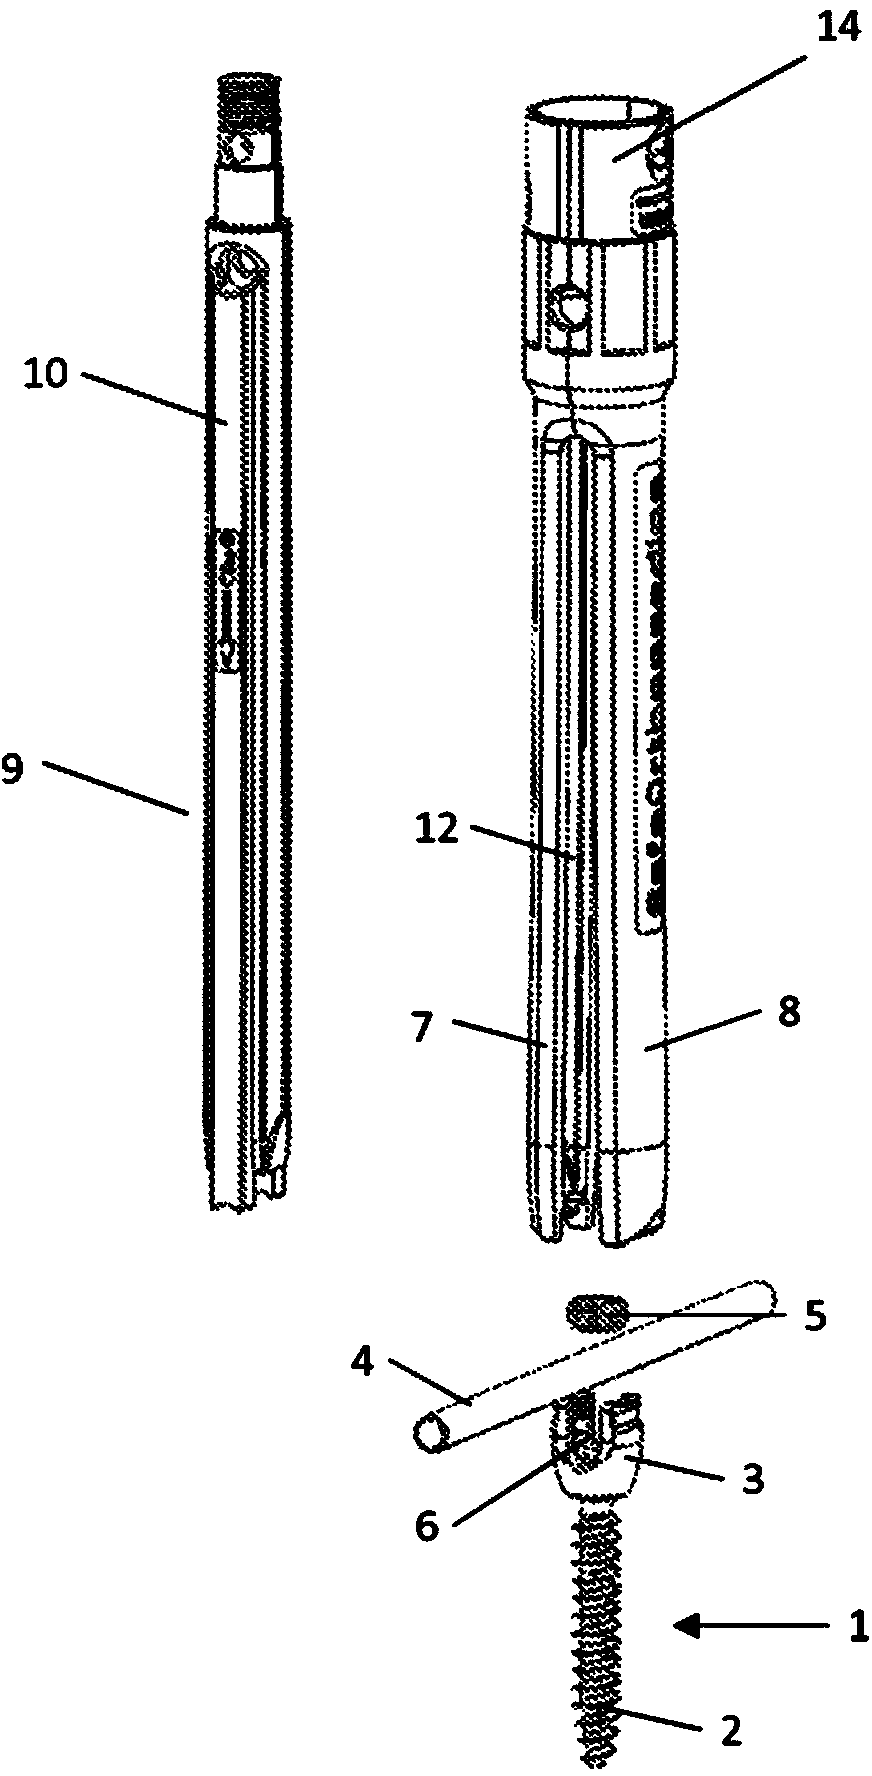 Surgical instrument and system for securing vertebrae